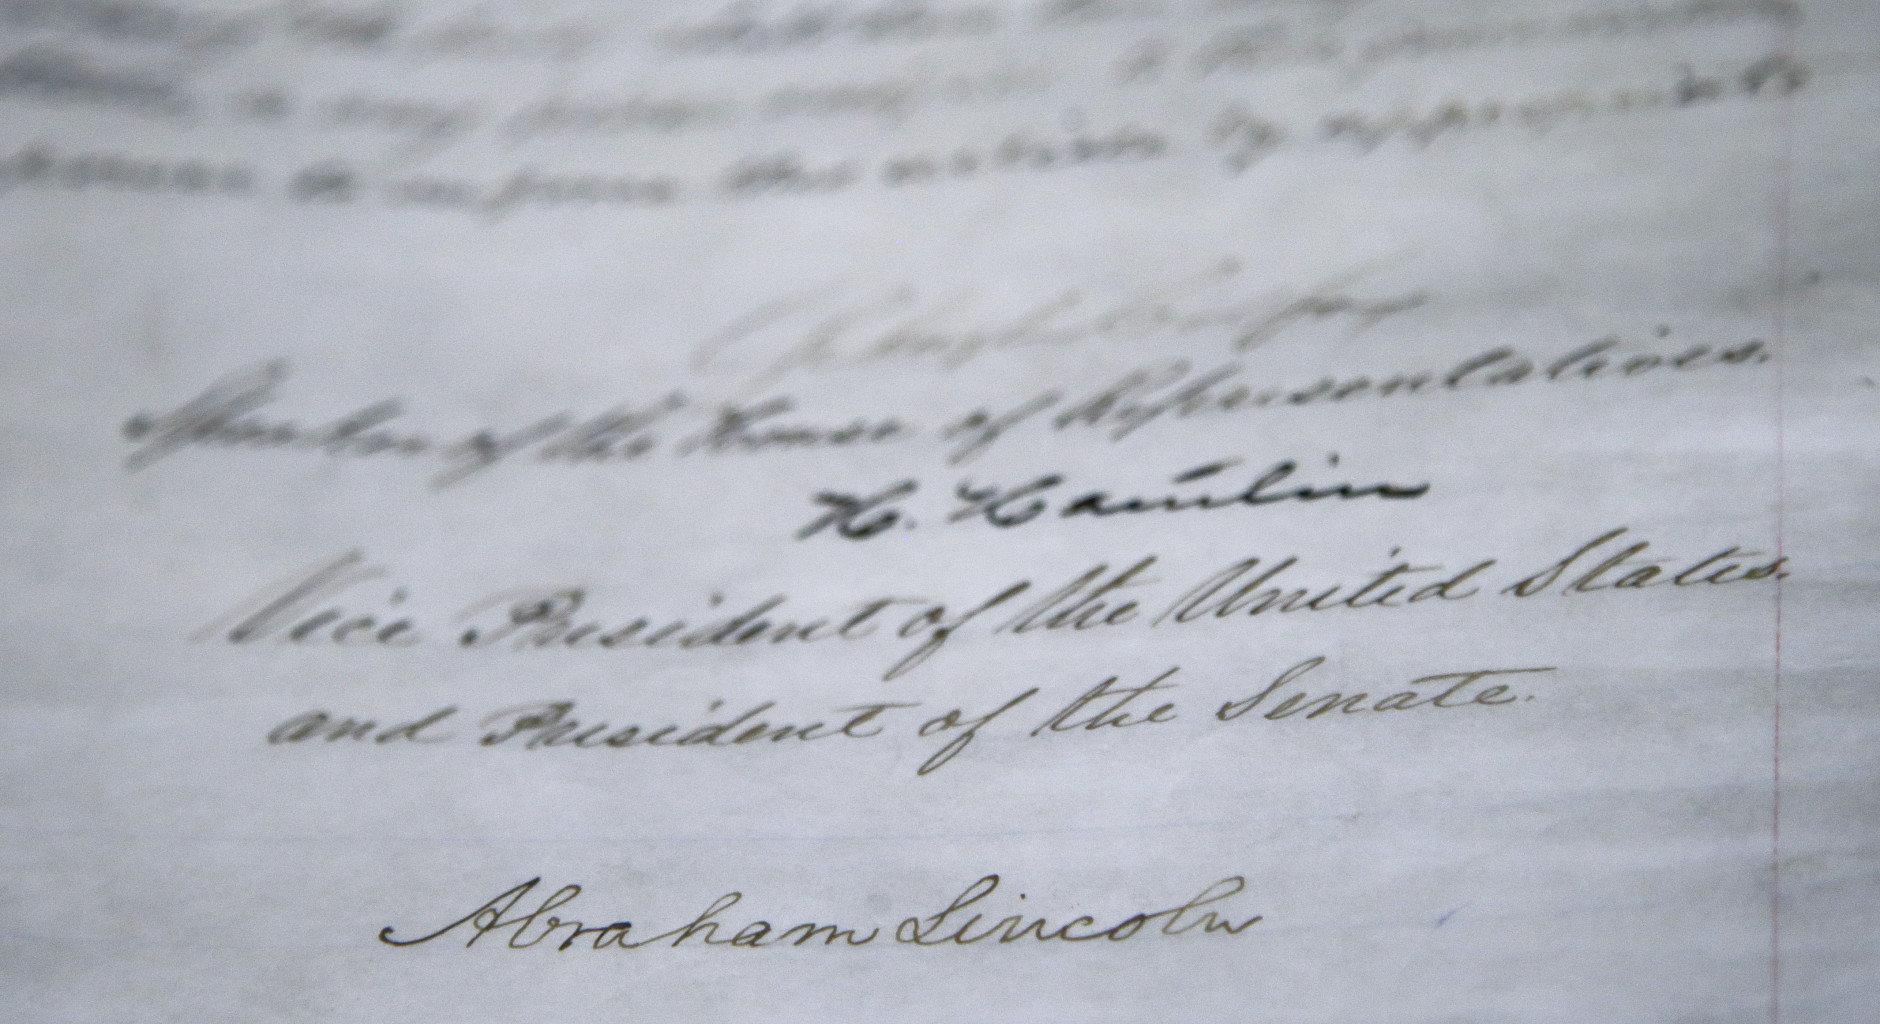 The signature of President Abraham Lincoln is seen on the 13th Amendment in a display at the Tennessee State Museum on Monday, Feb. 11, 2013, in Nashville, Tenn. The 13th Amendment, which abolished slavery, is on display along with the Emancipation Proclamation as part of an exhibit titled  Discovering the Civil War. (AP Photo/Mark Humphrey)